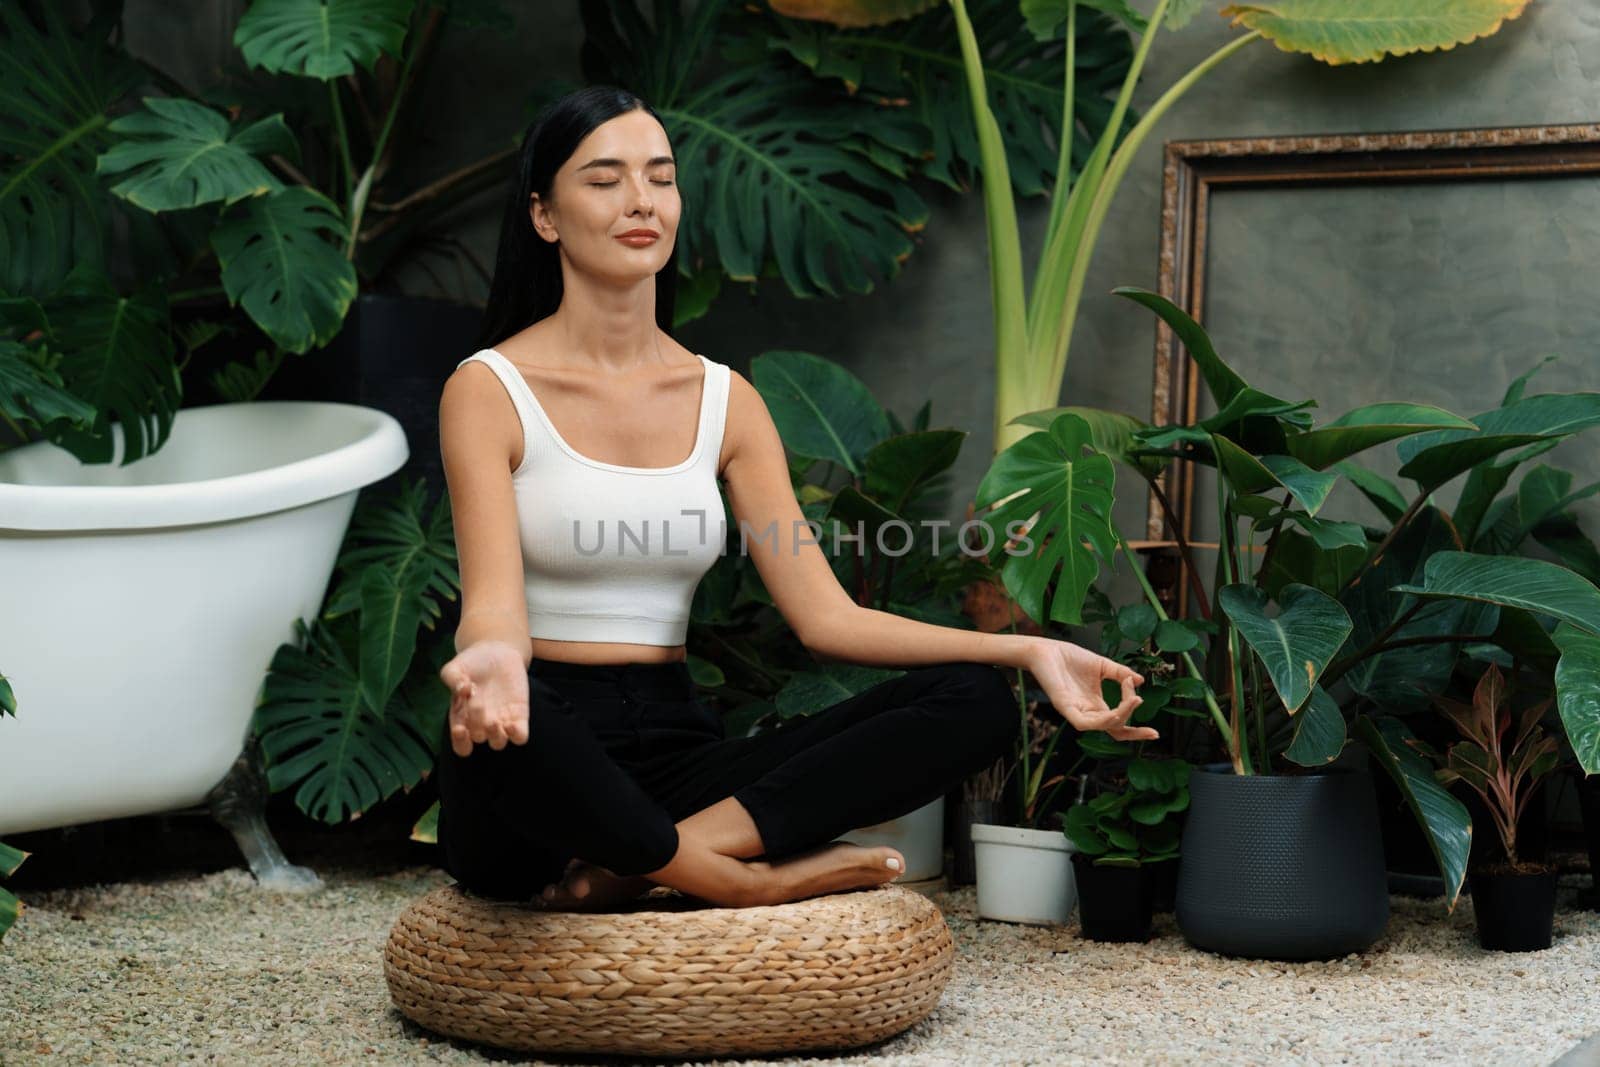 Young woman doing morning yoga and meditation in natural garden with plant leaf, enjoying the solitude and practicing meditative poses. Mindfulness activity and healthy mind lifestyle. Blithe